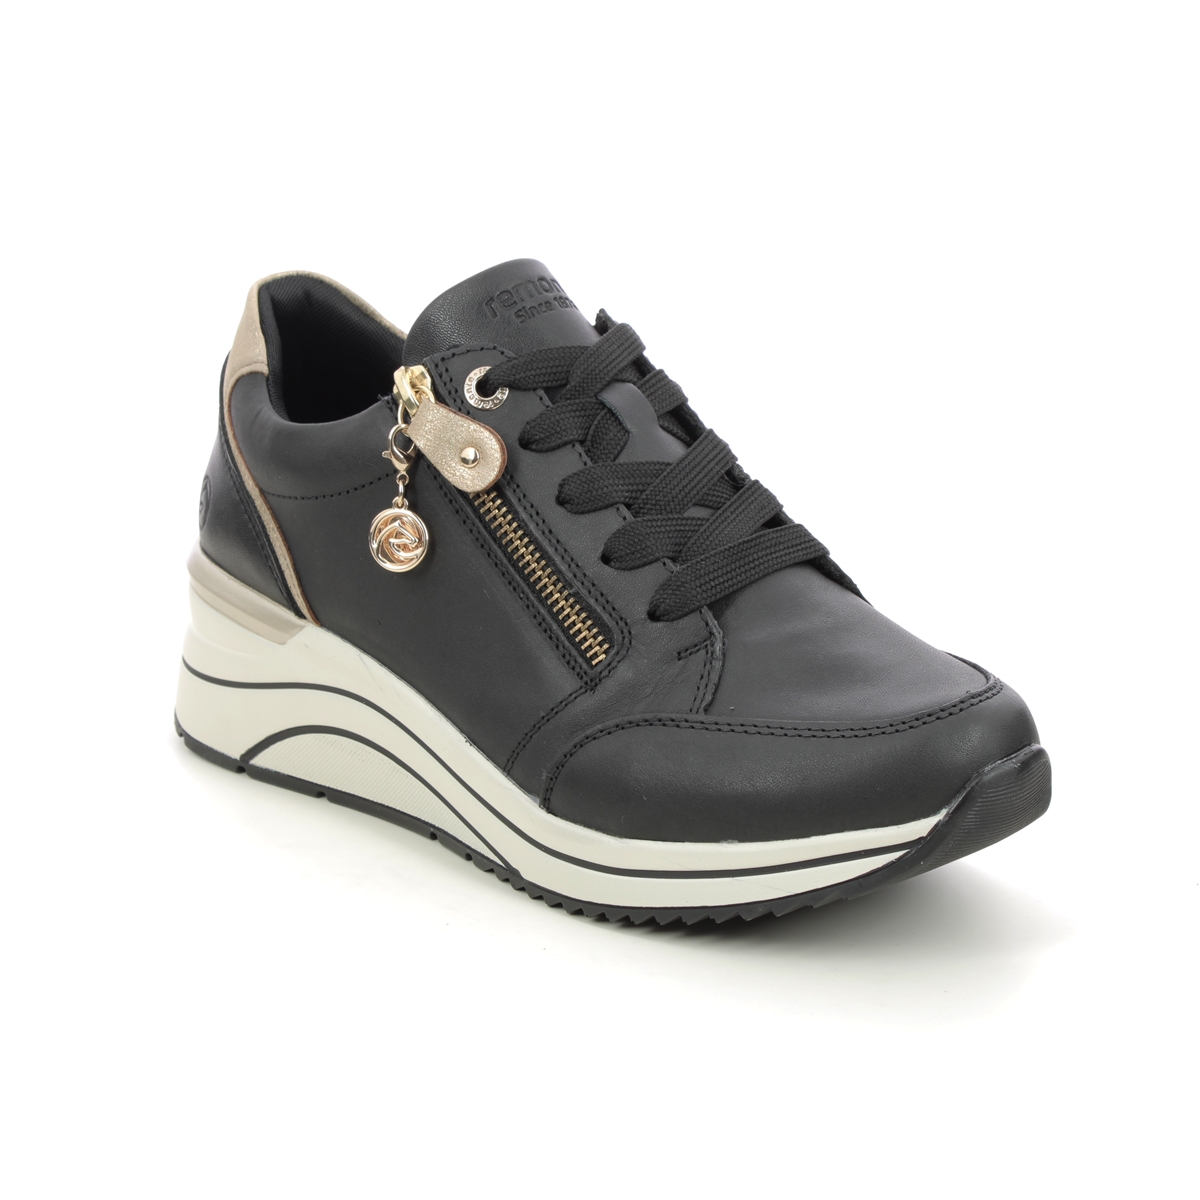 Remonte Ranzip Wedge Black Leather Womens Trainers D0T03-01 In Size 42 In Plain Black Leather